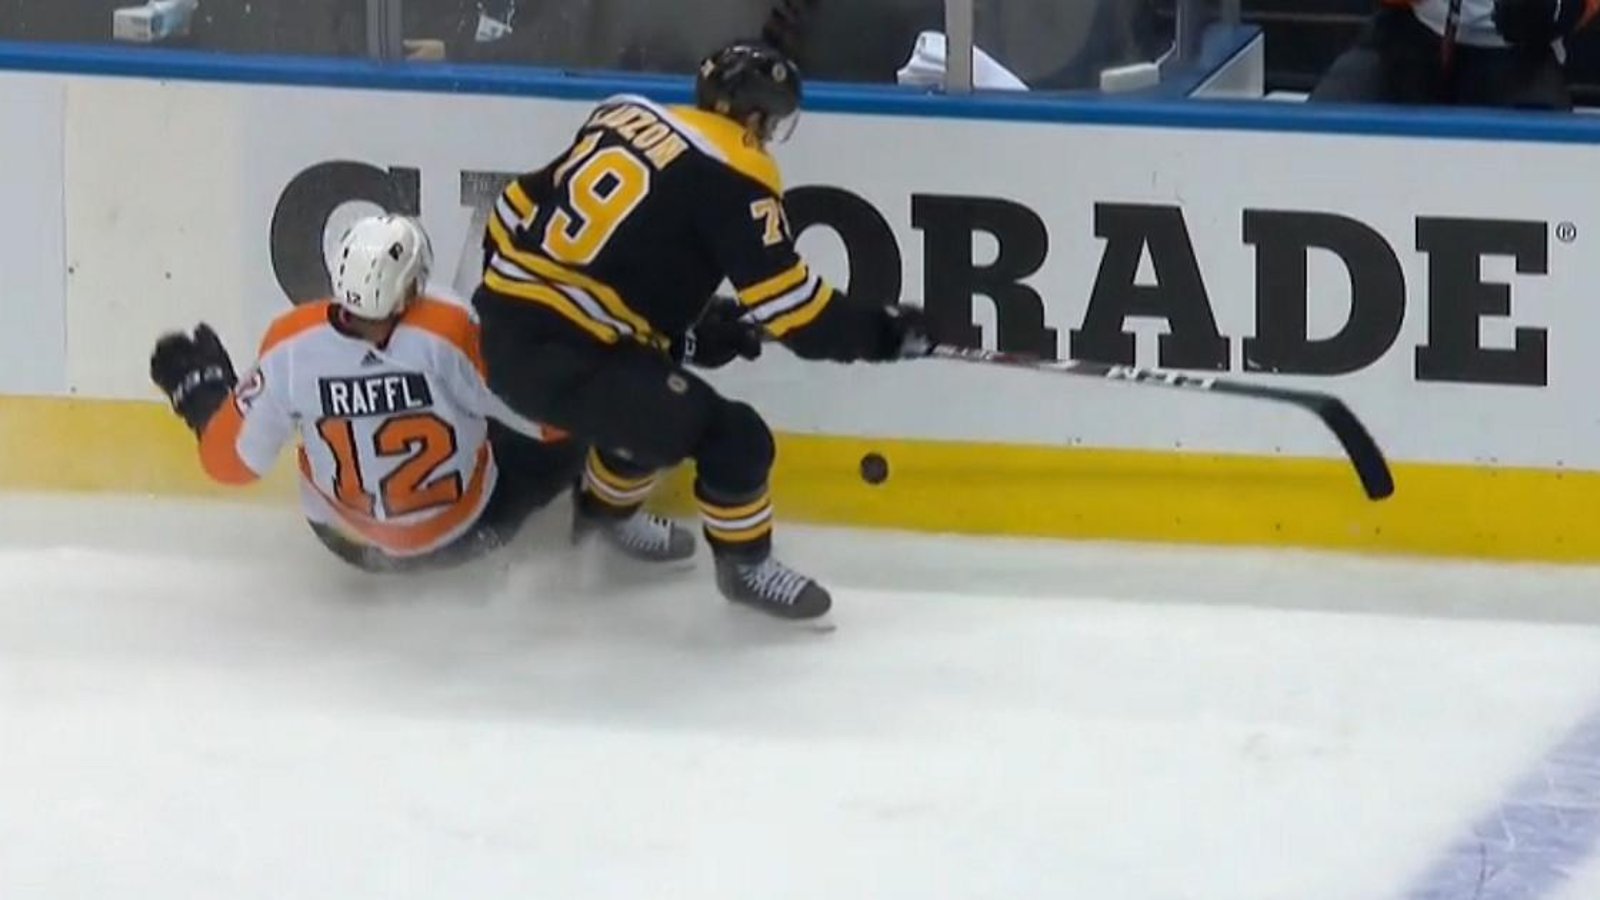 Michael Raffl leaves the game after awkward hit along the boards.